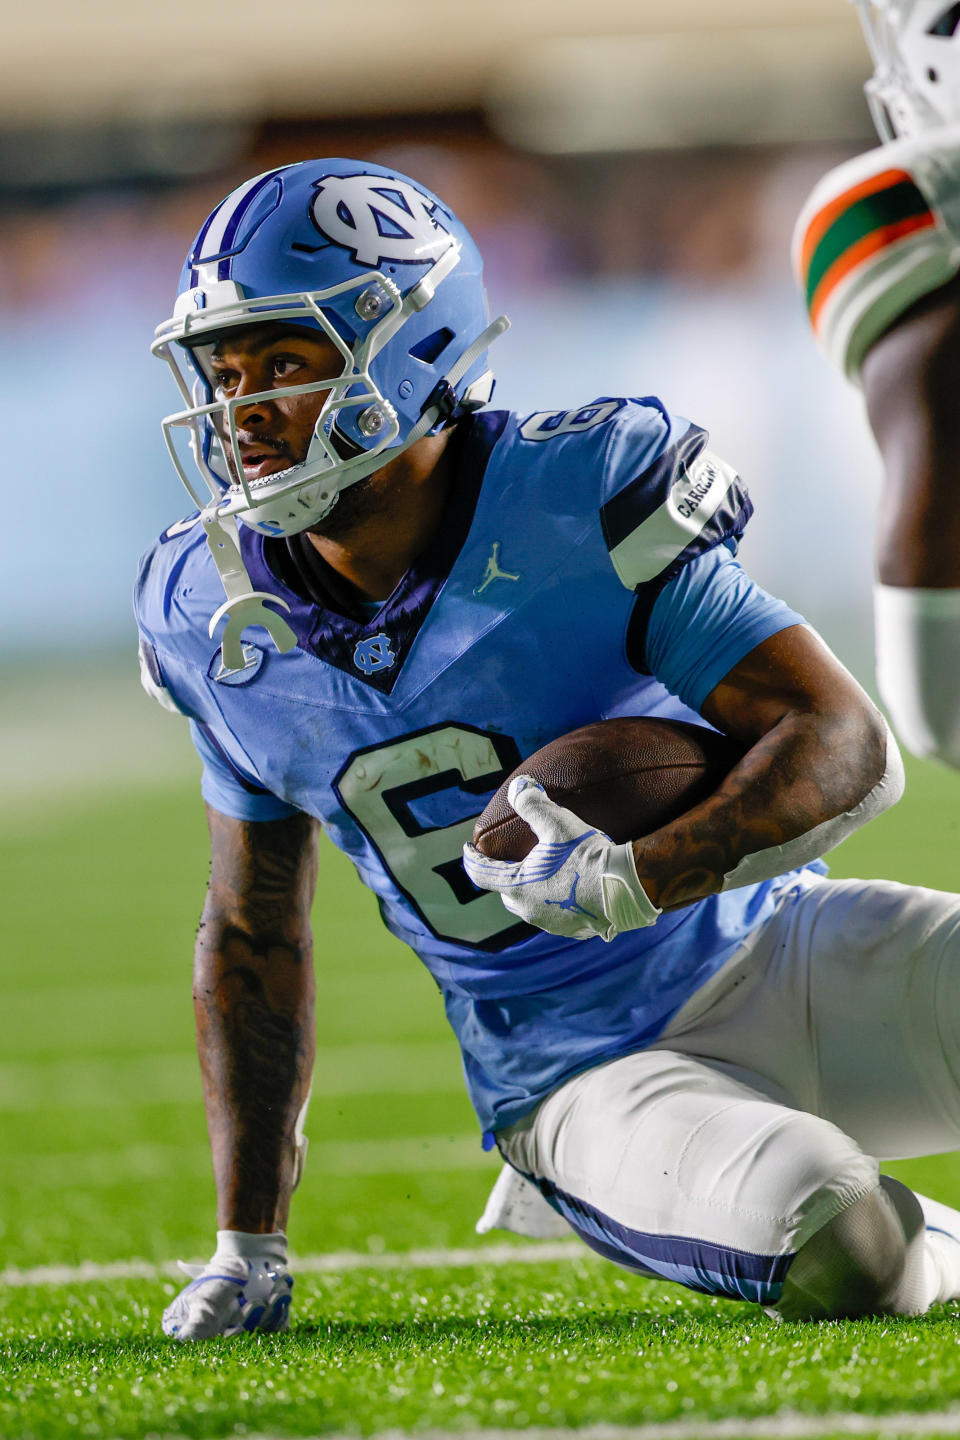 Oct 14, 2023; Chapel Hill, North Carolina, USA; North Carolina Tar Heels wide receiver Nate McCollum (6) after a run against the Miami Hurricanes in the second half at Kenan Memorial Stadium. Mandatory Credit: Nell Redmond-USA TODAY Sports